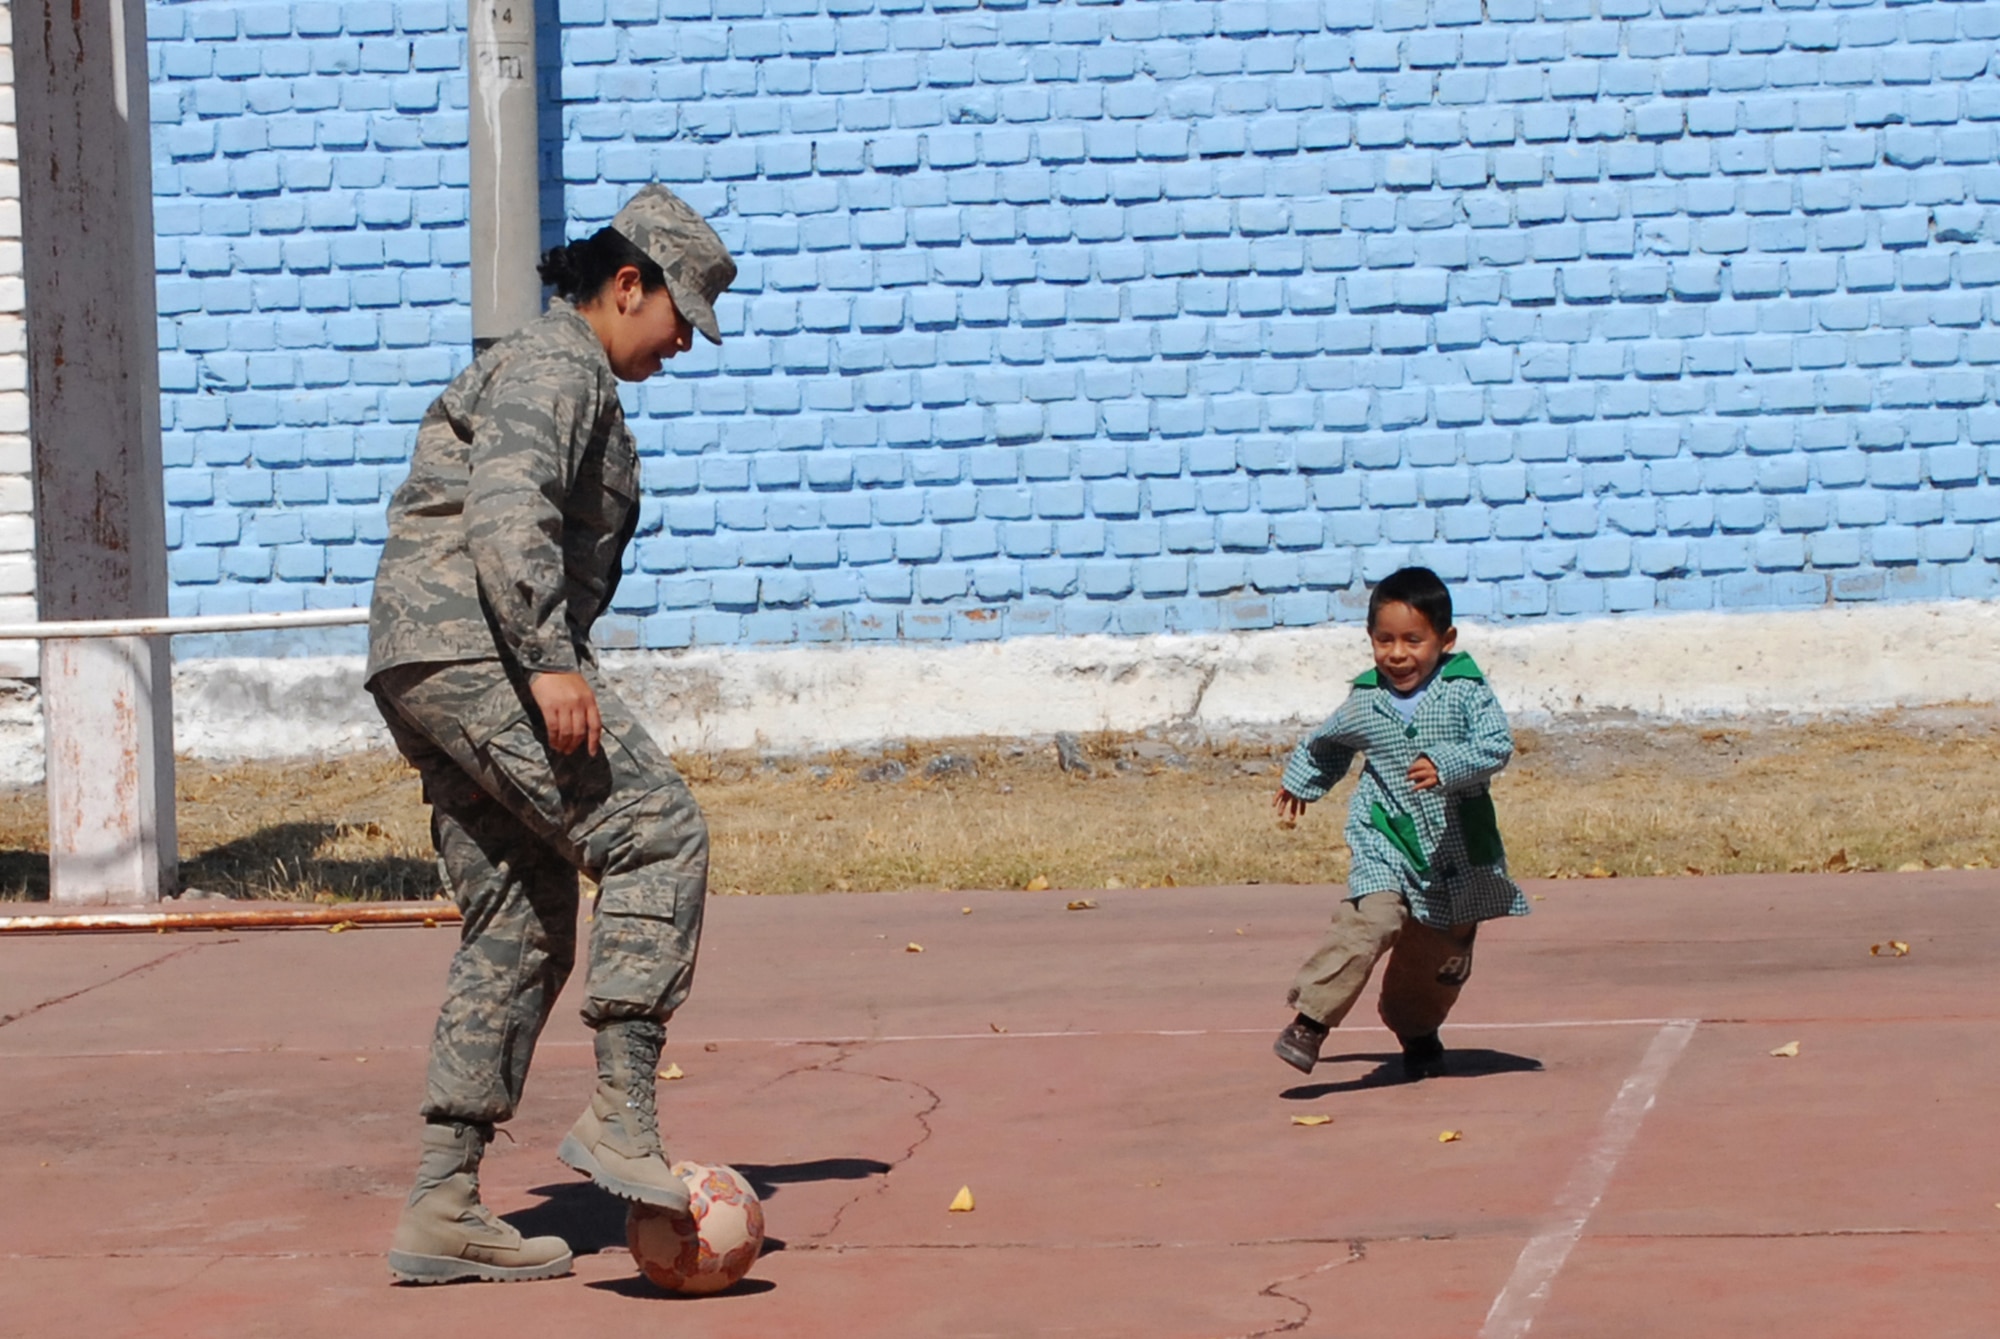 U.S. Air Force 1st Lt. Mary Pekas,  the public affairs officer assigned to Task Force New Horizons Peru, deployed from Davis-Monthan Air Force Base, Ariz., enjoys a game of soccer with Diego Omar Palomino Guerrero, 5, during a visit to I.E. Inicial CRL. Miguel Peñarrieta Elementary School June 4 in Los Cabitos, Peru, the location at which U.S. military members are based in support of New Horizons Peru 2008, a humanitarian event that benefits thousands of Peruvians. (U.S. Air Force photo/ Airman 1st Class Tracie Forte)